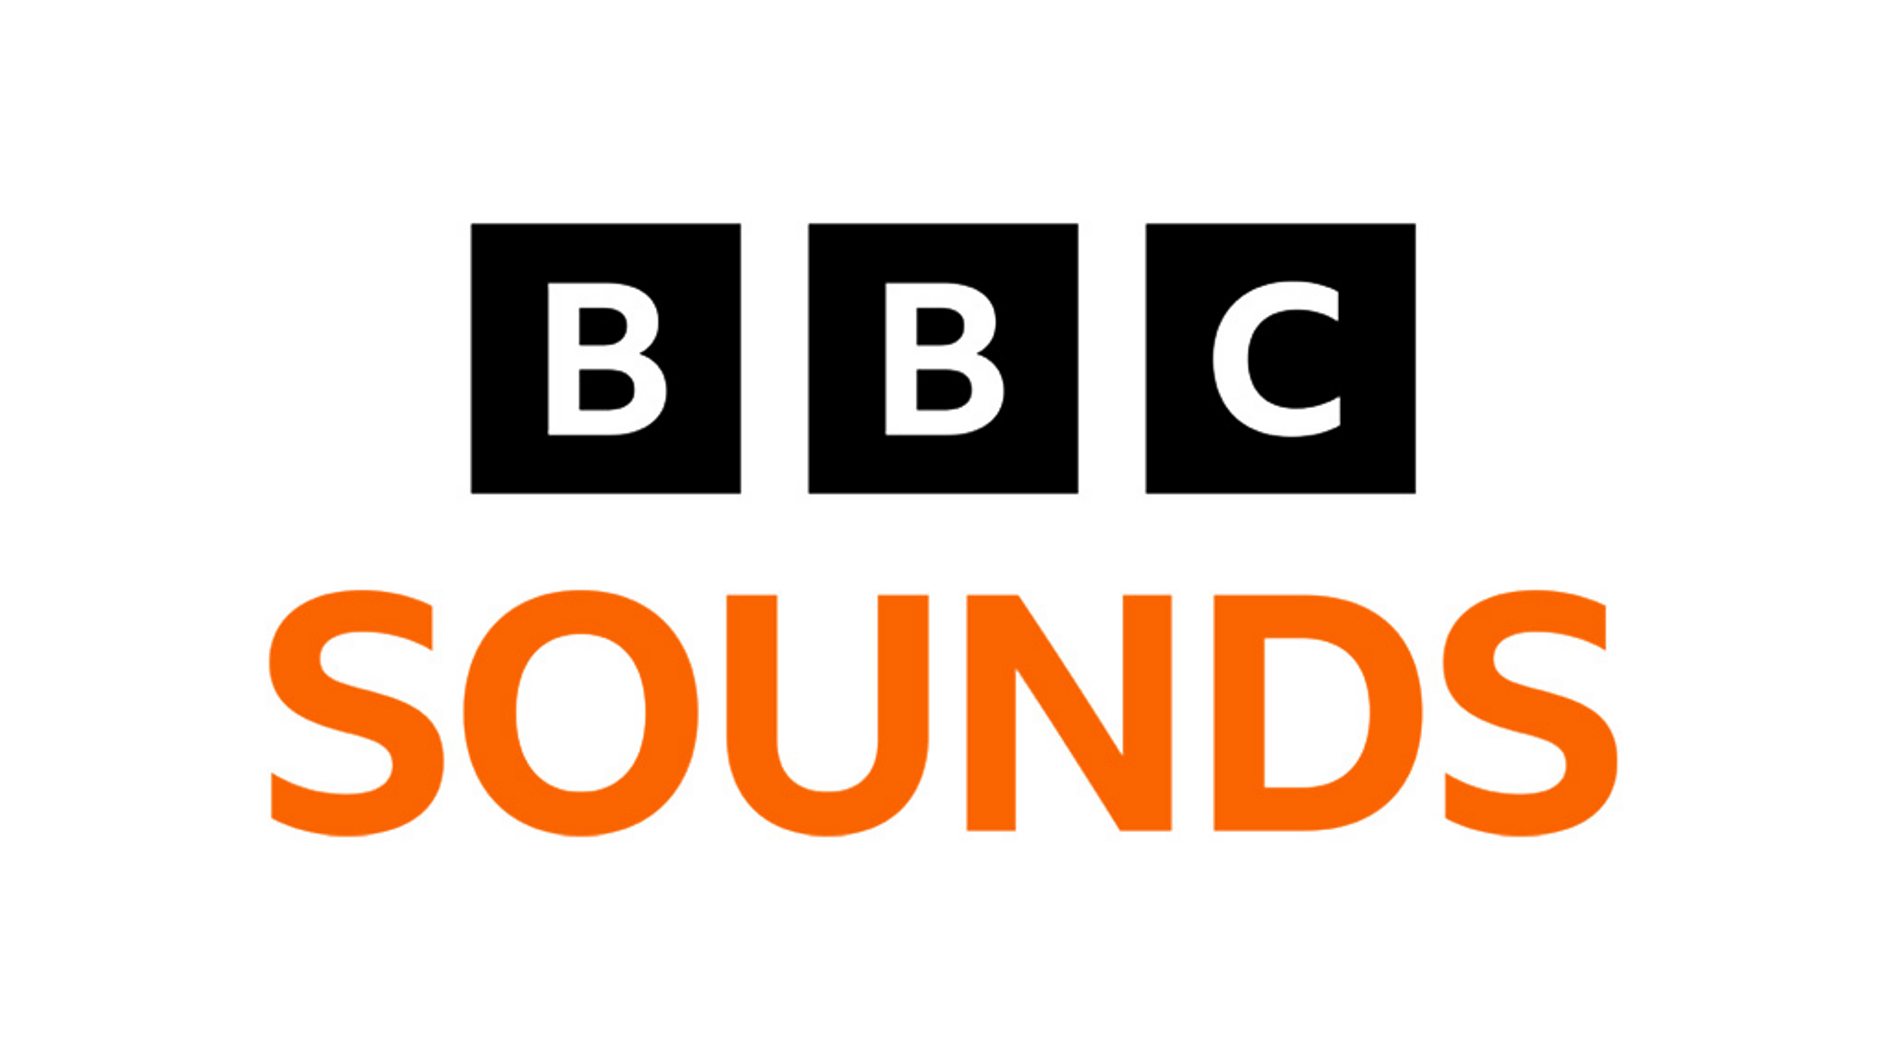 BBC Sounds enables multi-room playback on Alexa devices